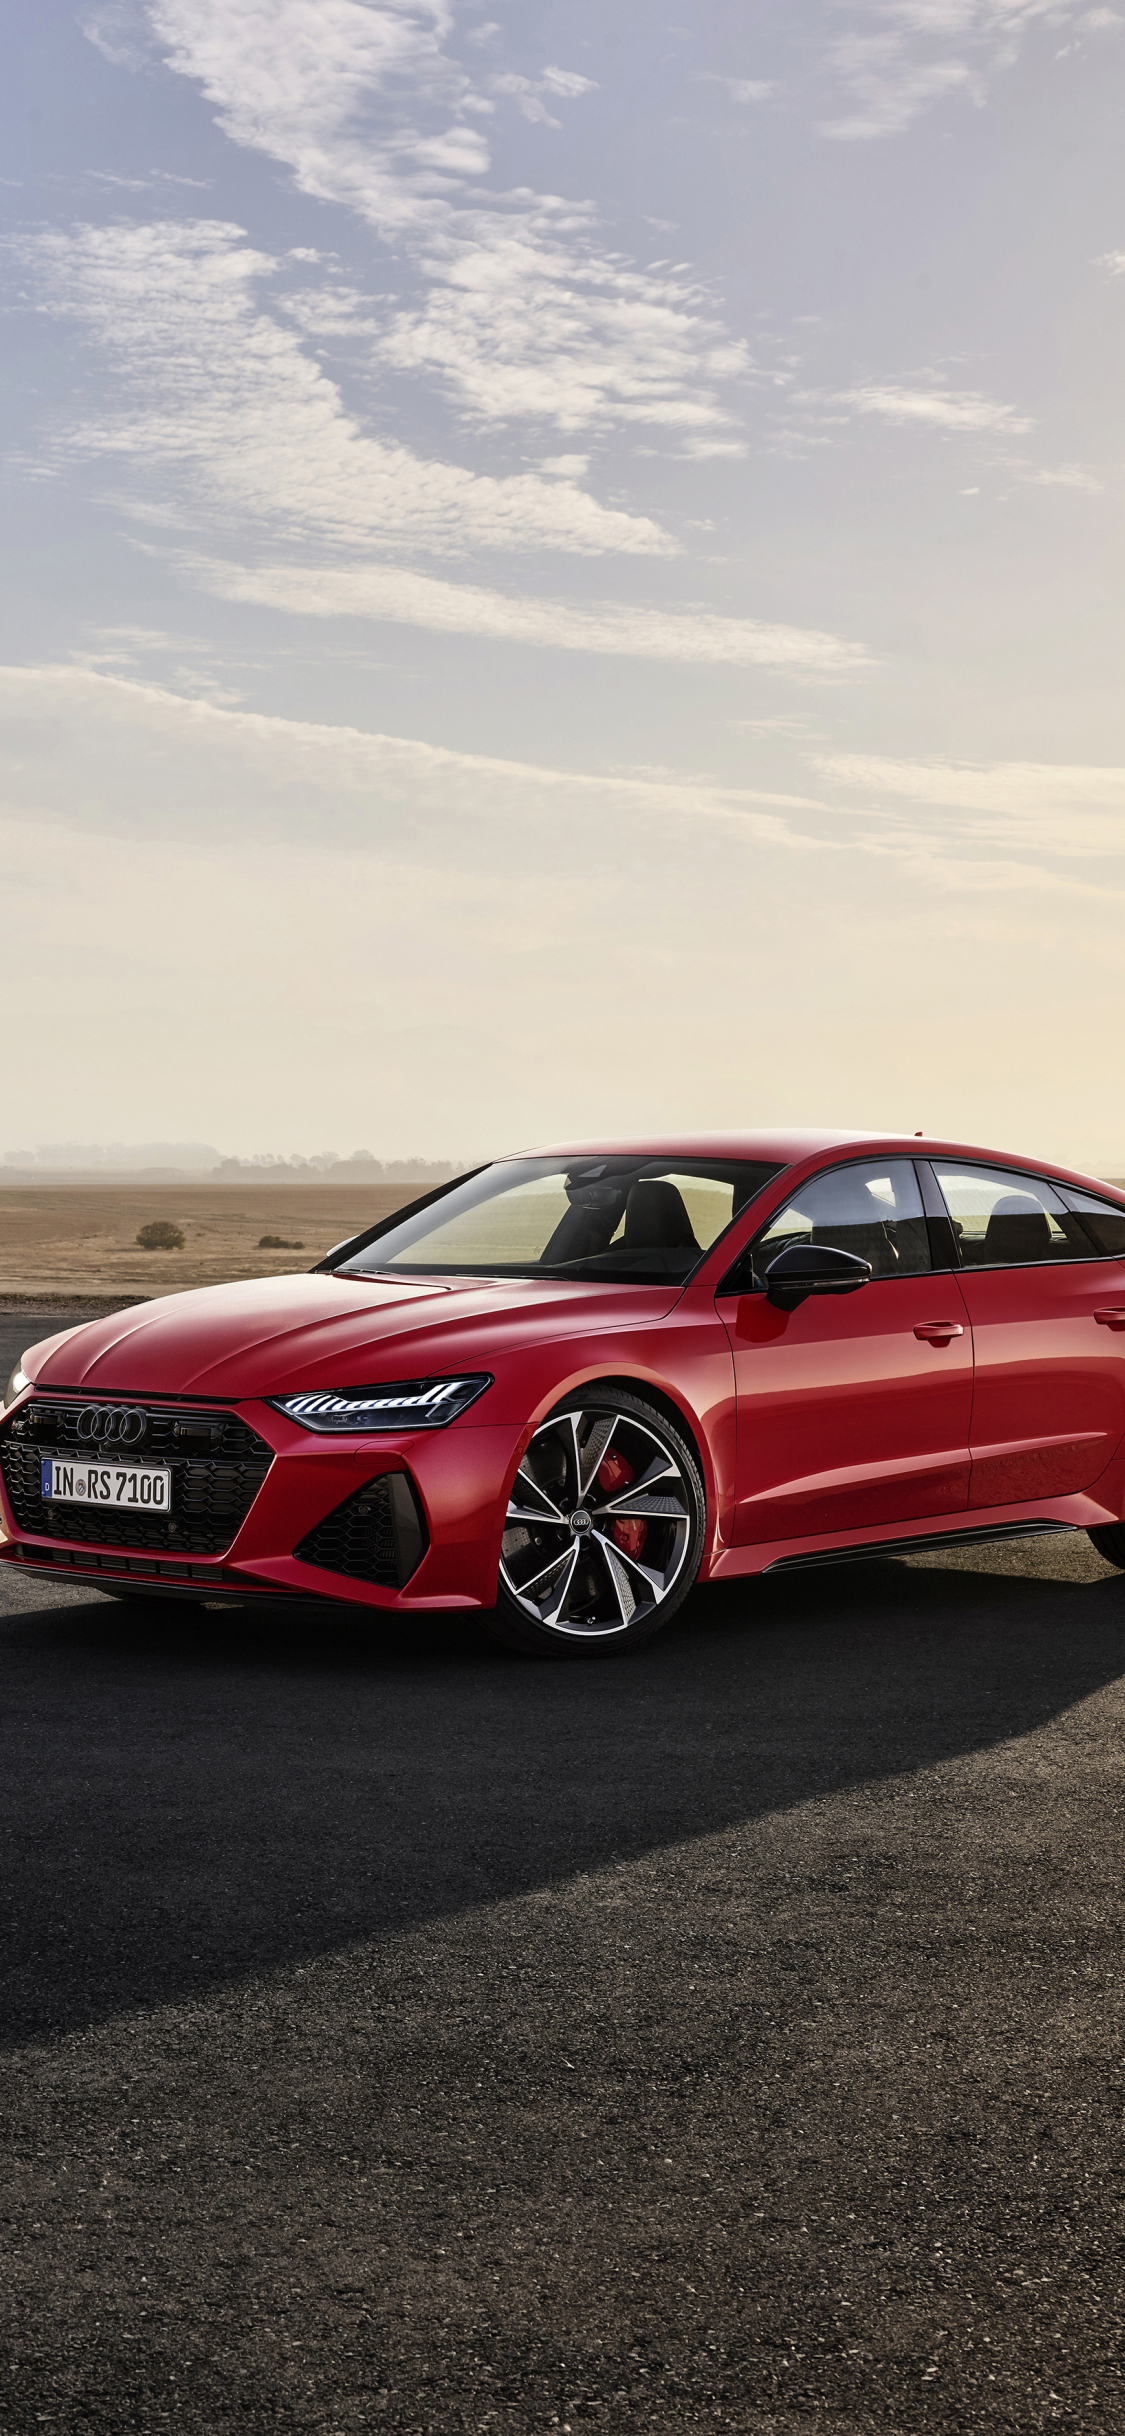 1080x1920 Audi RS7 Wallpapers for Android Mobile Smartphone [Full HD]